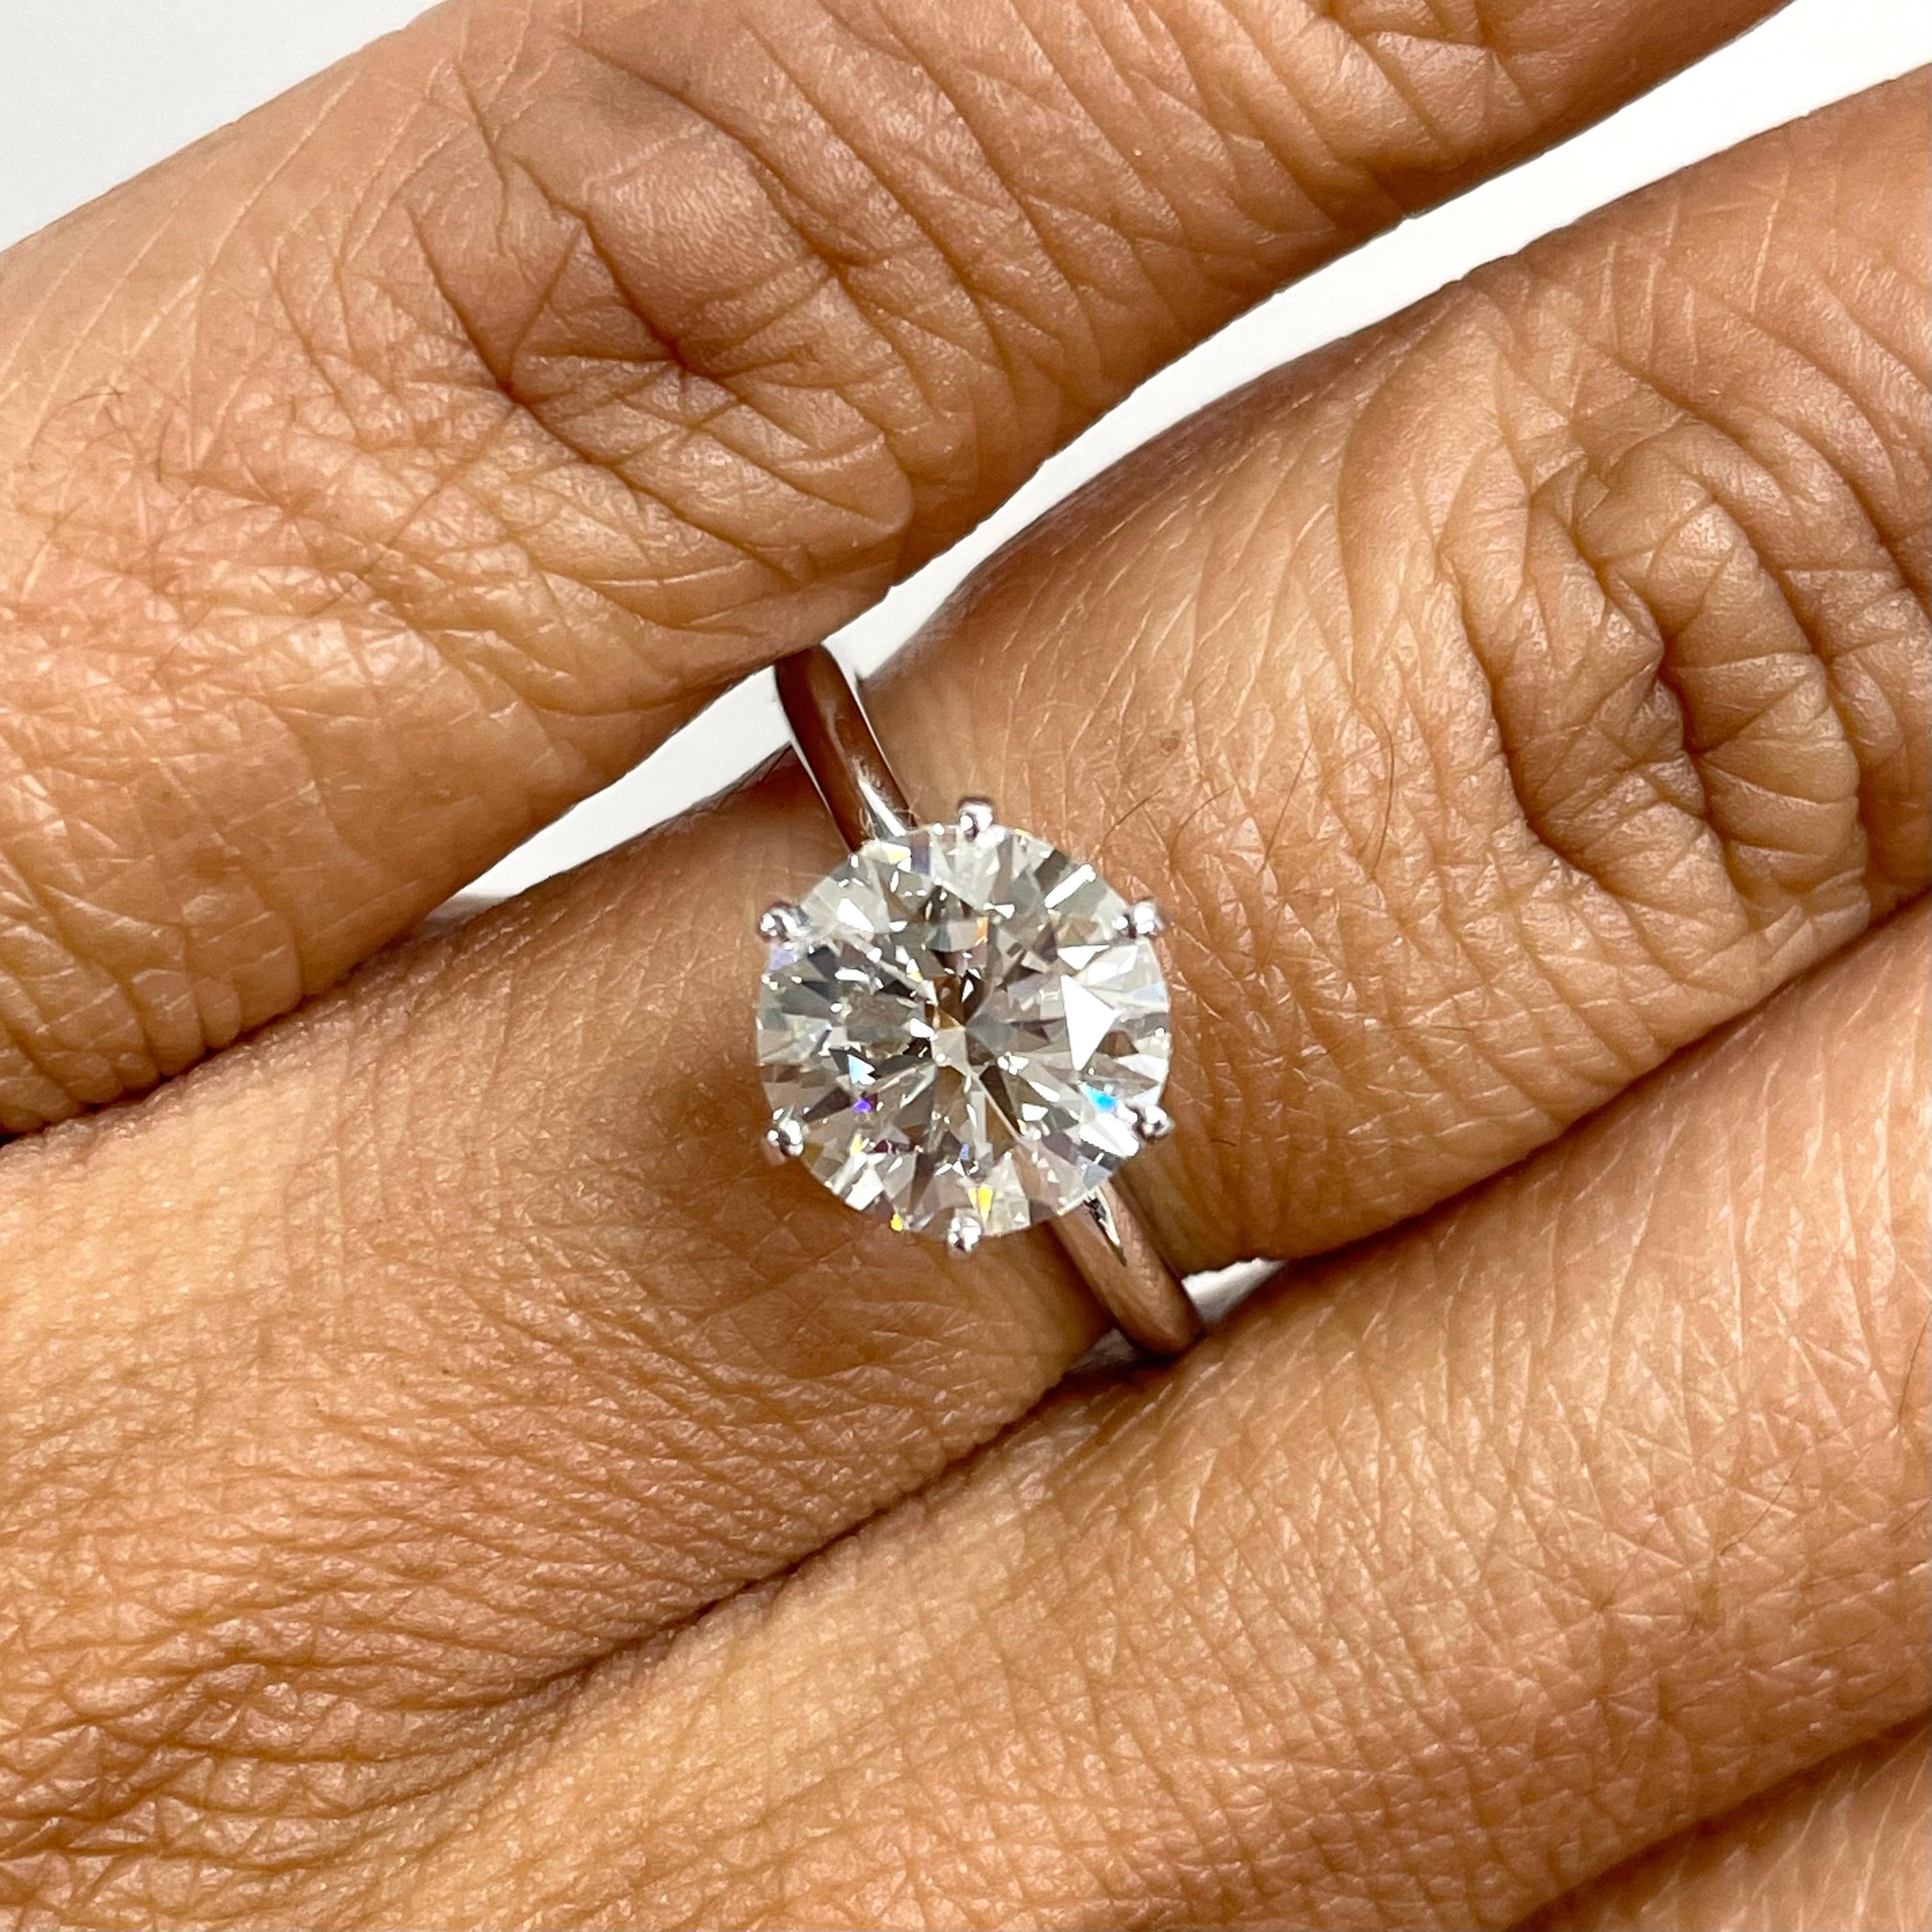 This stunning 2.00 ct H IF GIA certified Round Brilliant Cut Diamond Ring is all the bang for the buck. With measurement similar to that of a 2.25 carat and stunning fire and luster, it is a dazzler.

Center Diamond Shape: Round Brilliant
Center